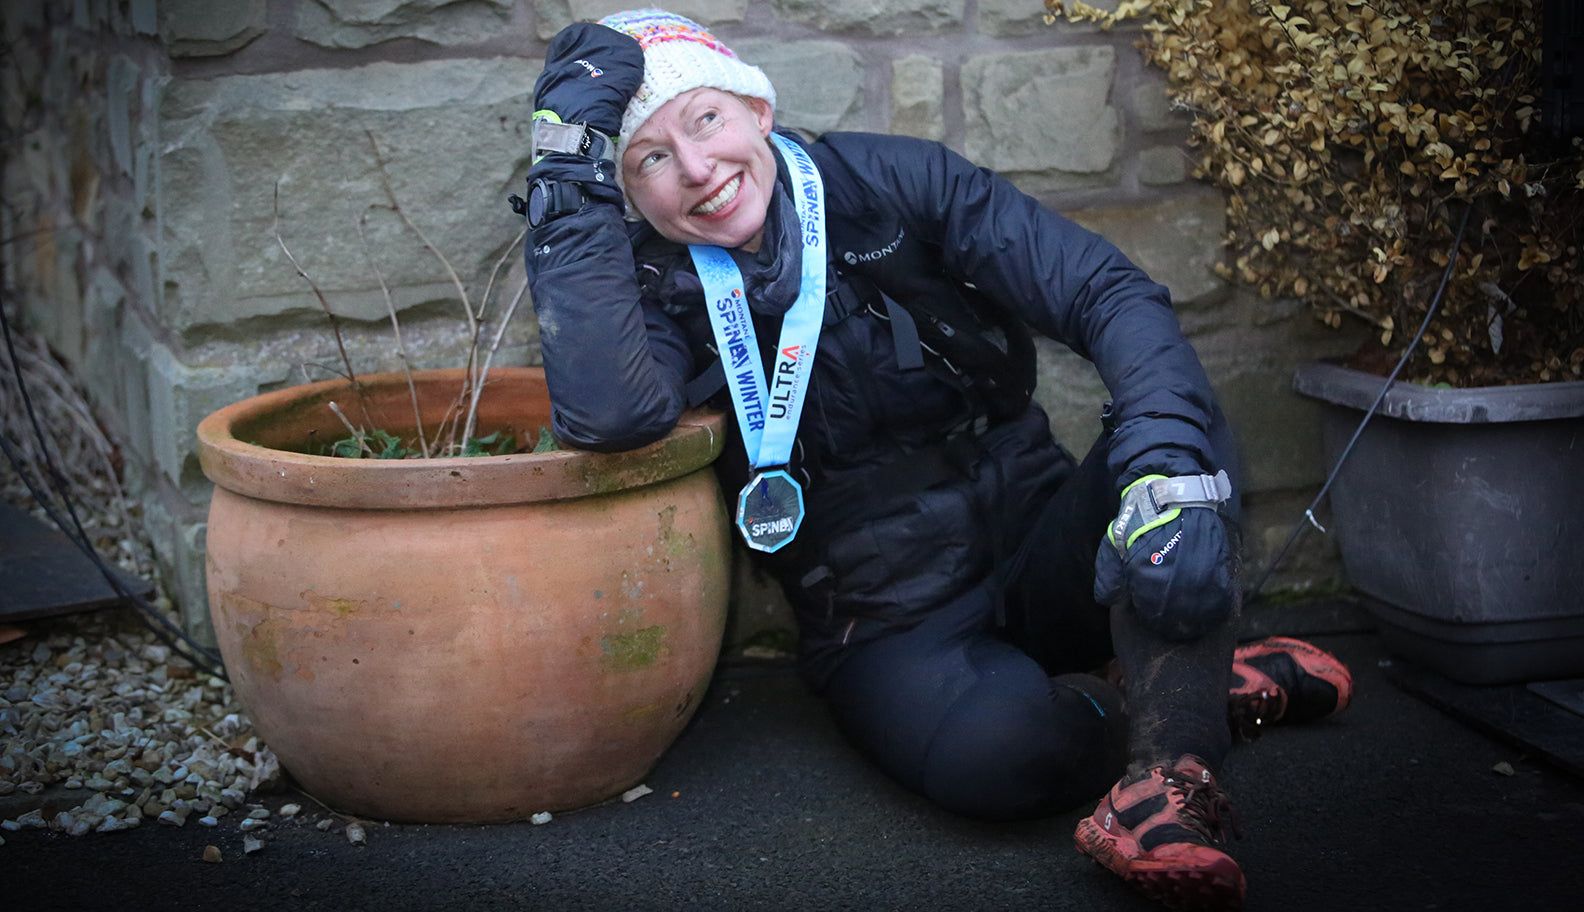 Debbie Martin-Consani claims 1st female finisher of the Spine | Montane